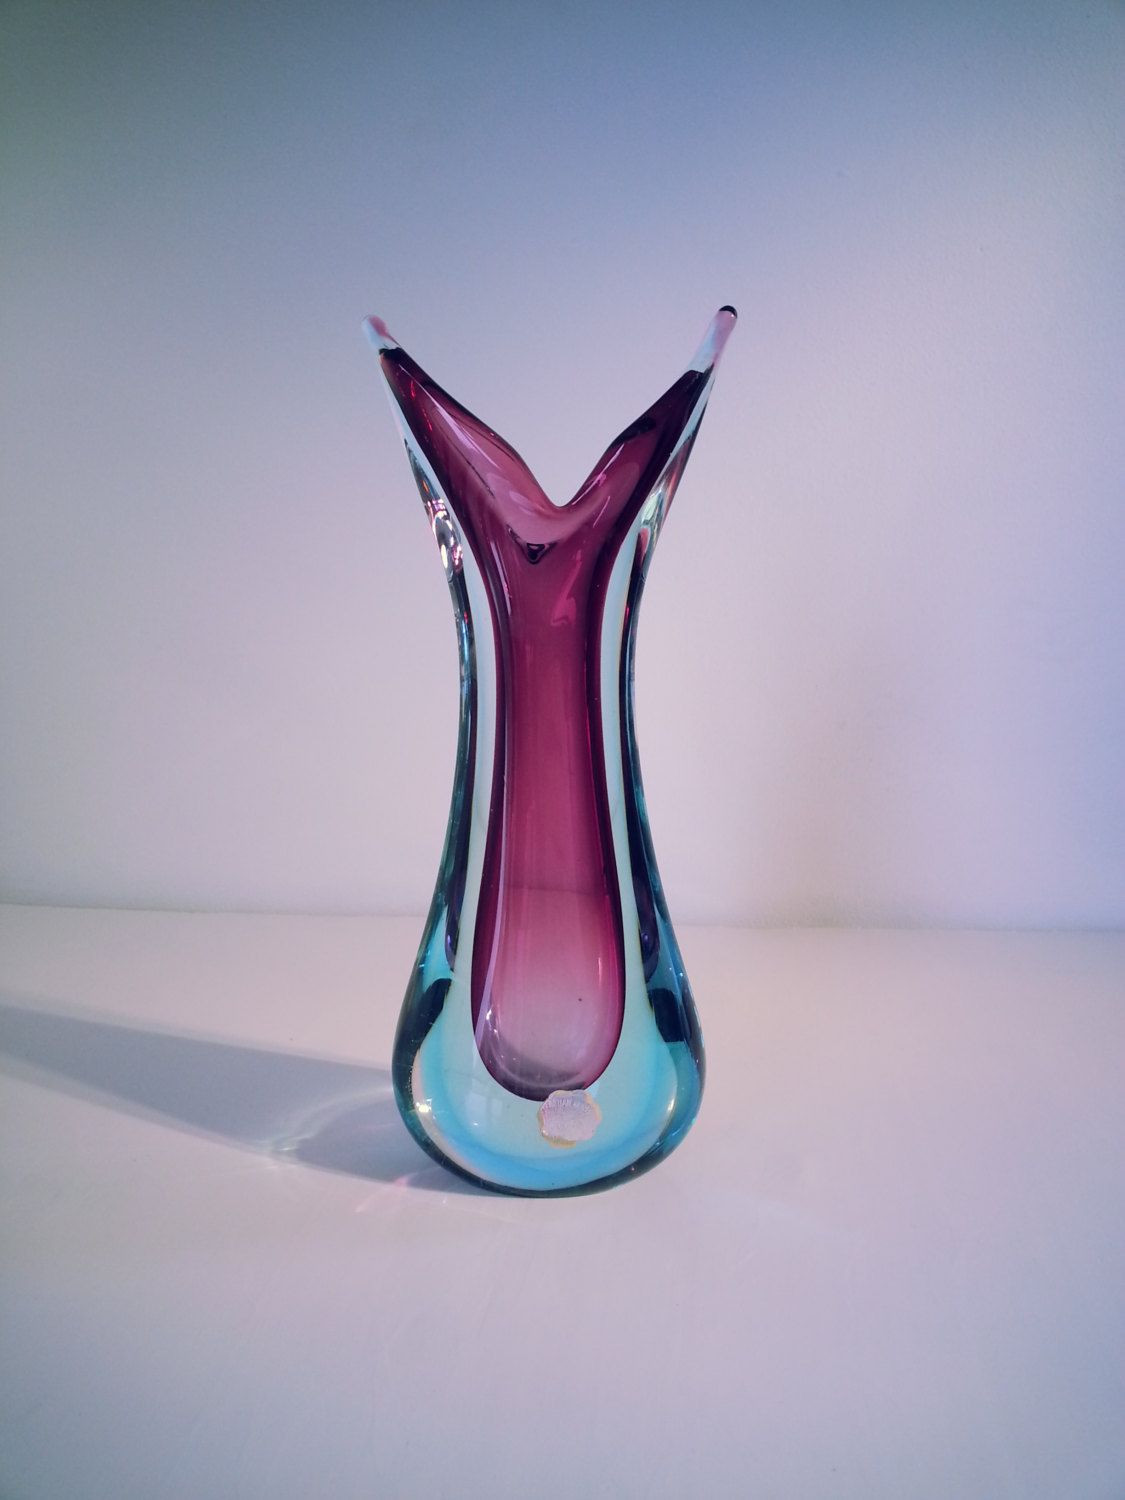 Clear Glass Teardrop Vase Of Murano sommerso Genuine Venetian Glass 1950s 1960s Purple Blue for Murano sommerso Genuine Venetian Glass 1950s 1960s Purple Blue Glass Vase Pulled Design Vase Made In Italy by Fcollectables On Etsy